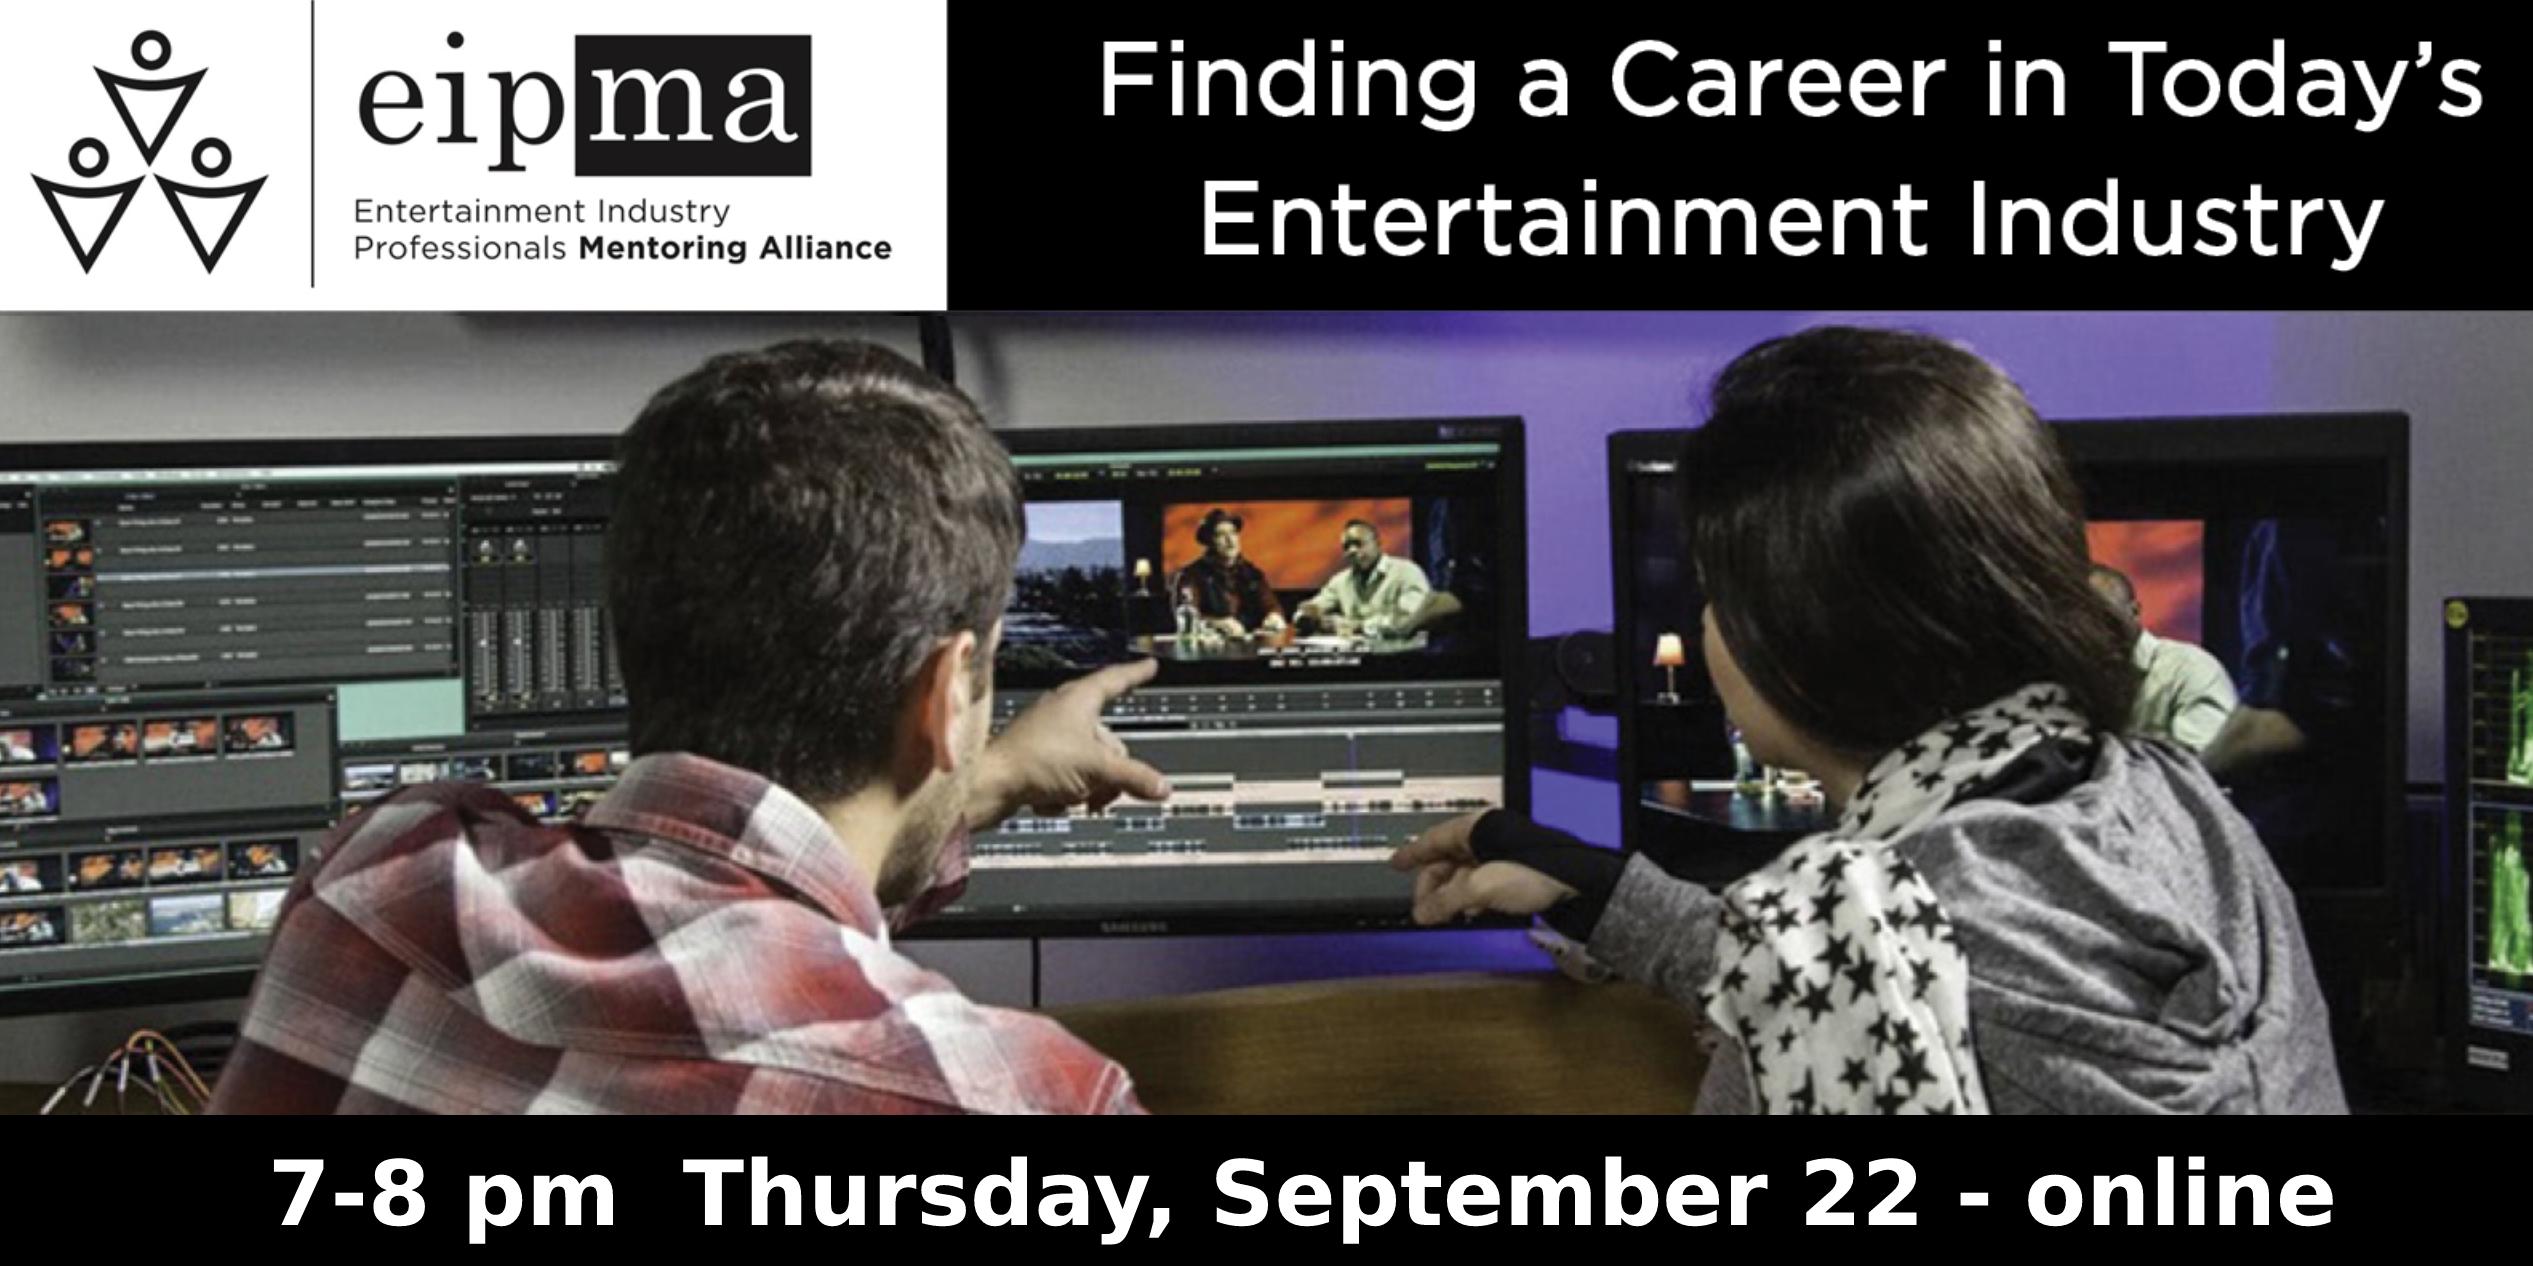 Library: Finding a Career in Today's Entertainment Industry - online